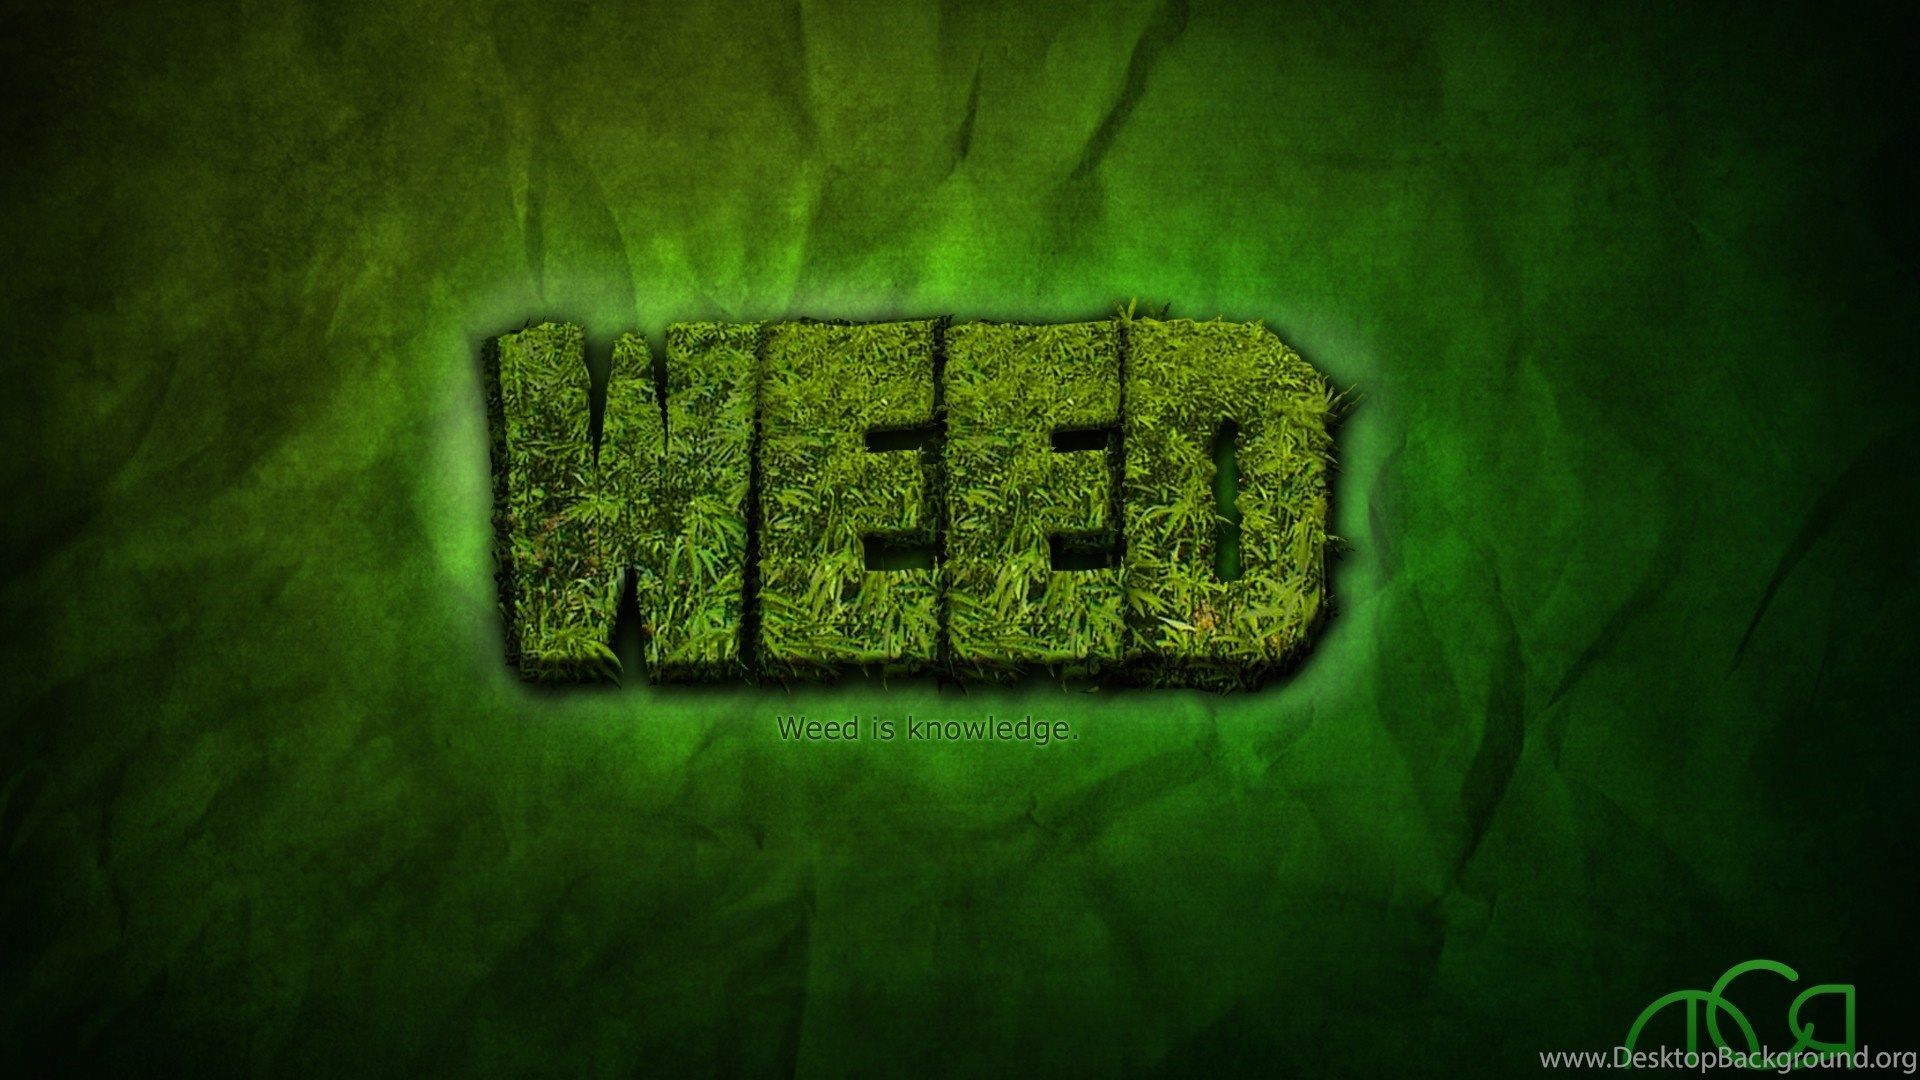 HD Weed Widescreen 1080P Wallpaper Free HD Weed Widescreen 1080P Background